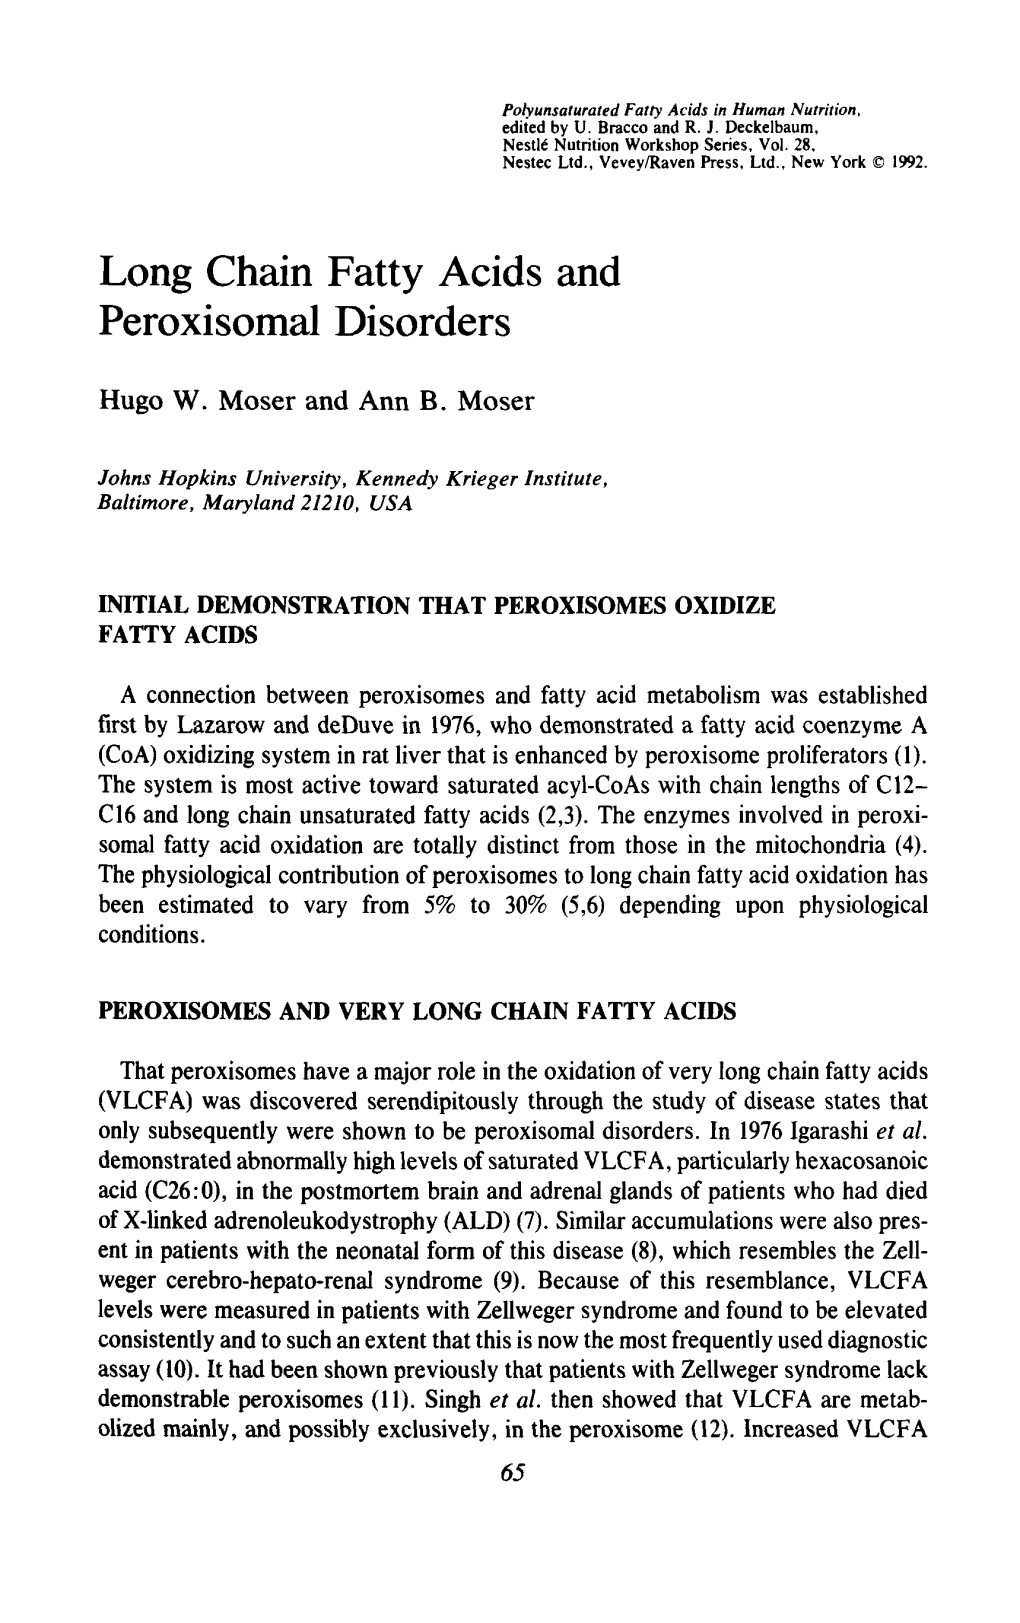 Long Chain Fatty Acids and Peroxisomal Disorders